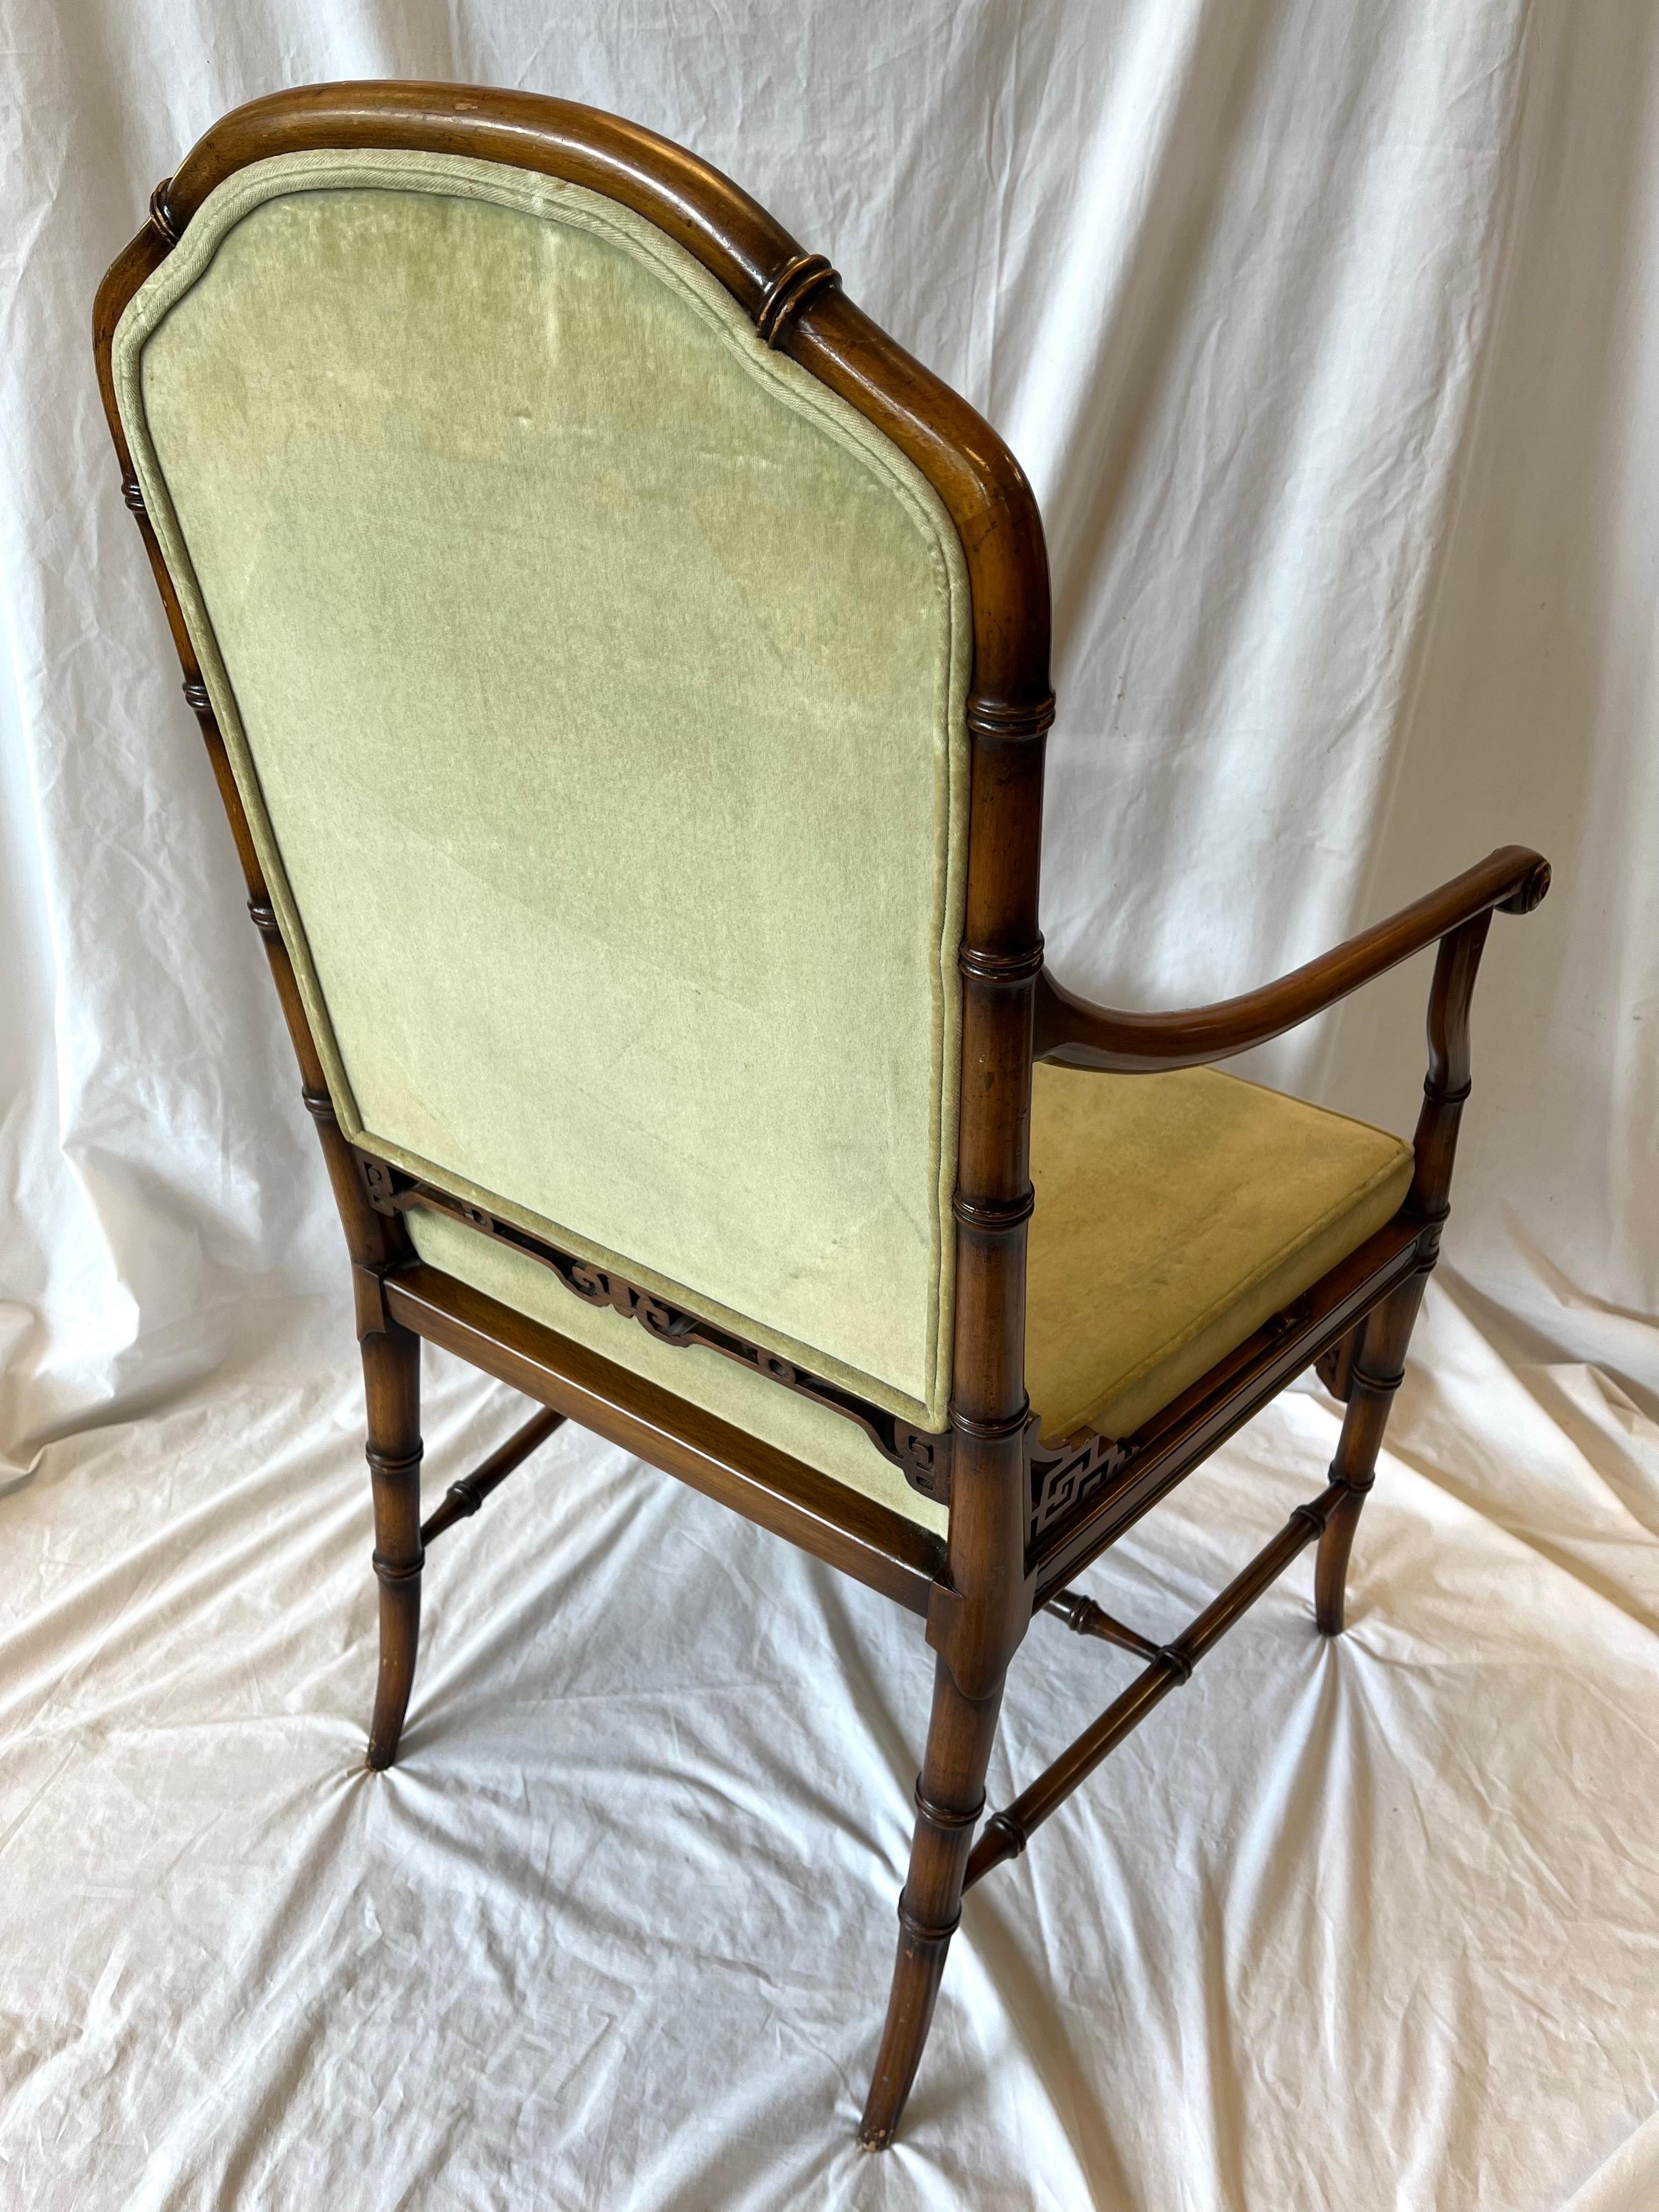 Vintage Faux Bamboo Chinoiserie Style Upholstered Fretwork Armchair Desk Chair 6